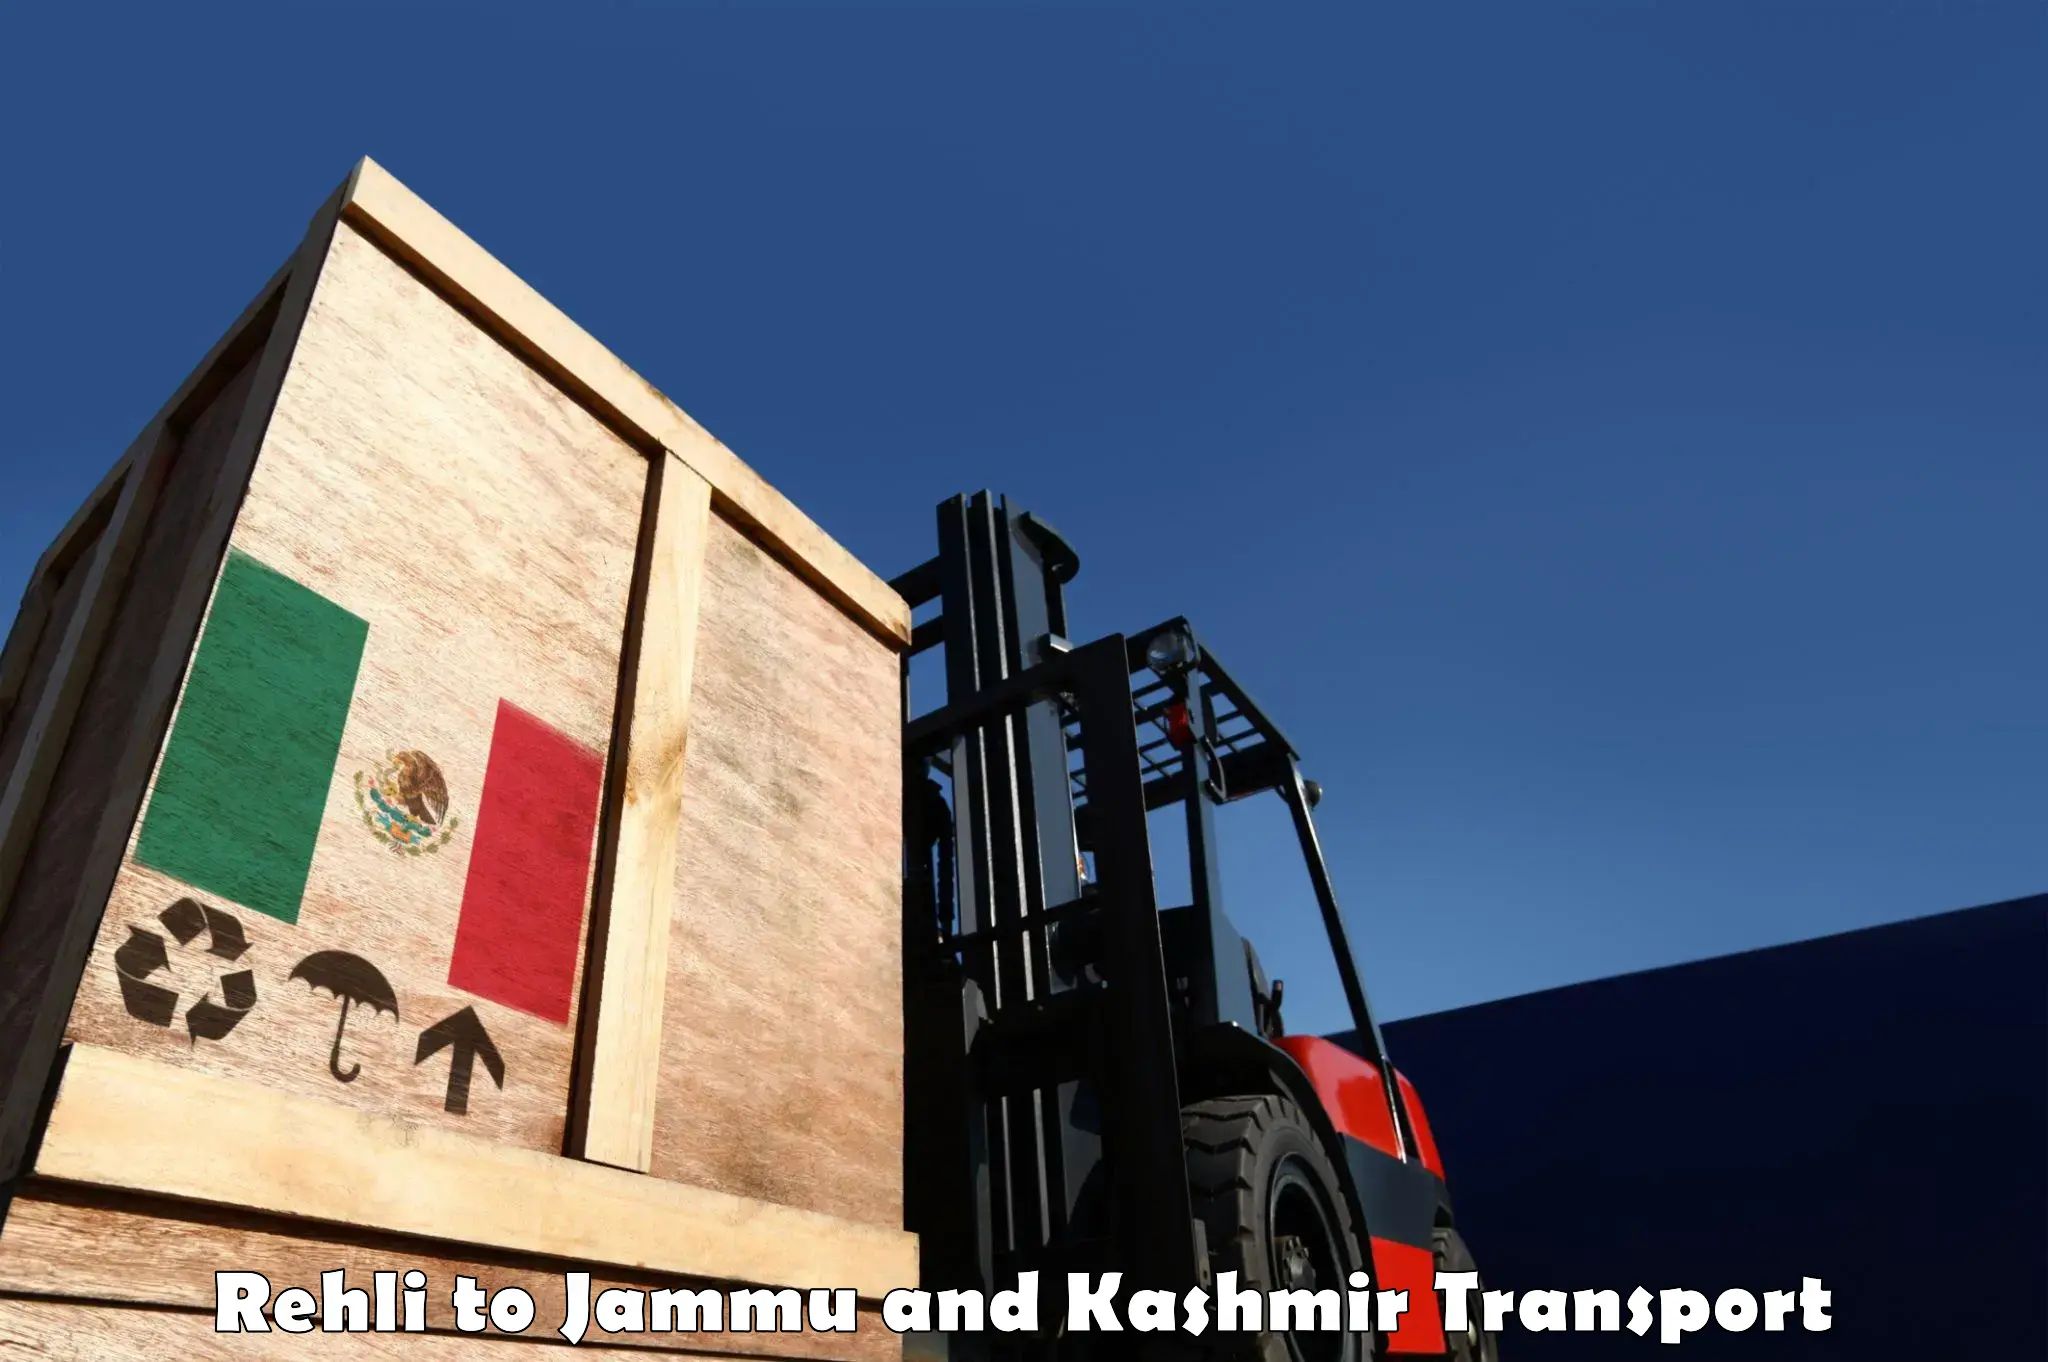 Container transport service Rehli to Baramulla